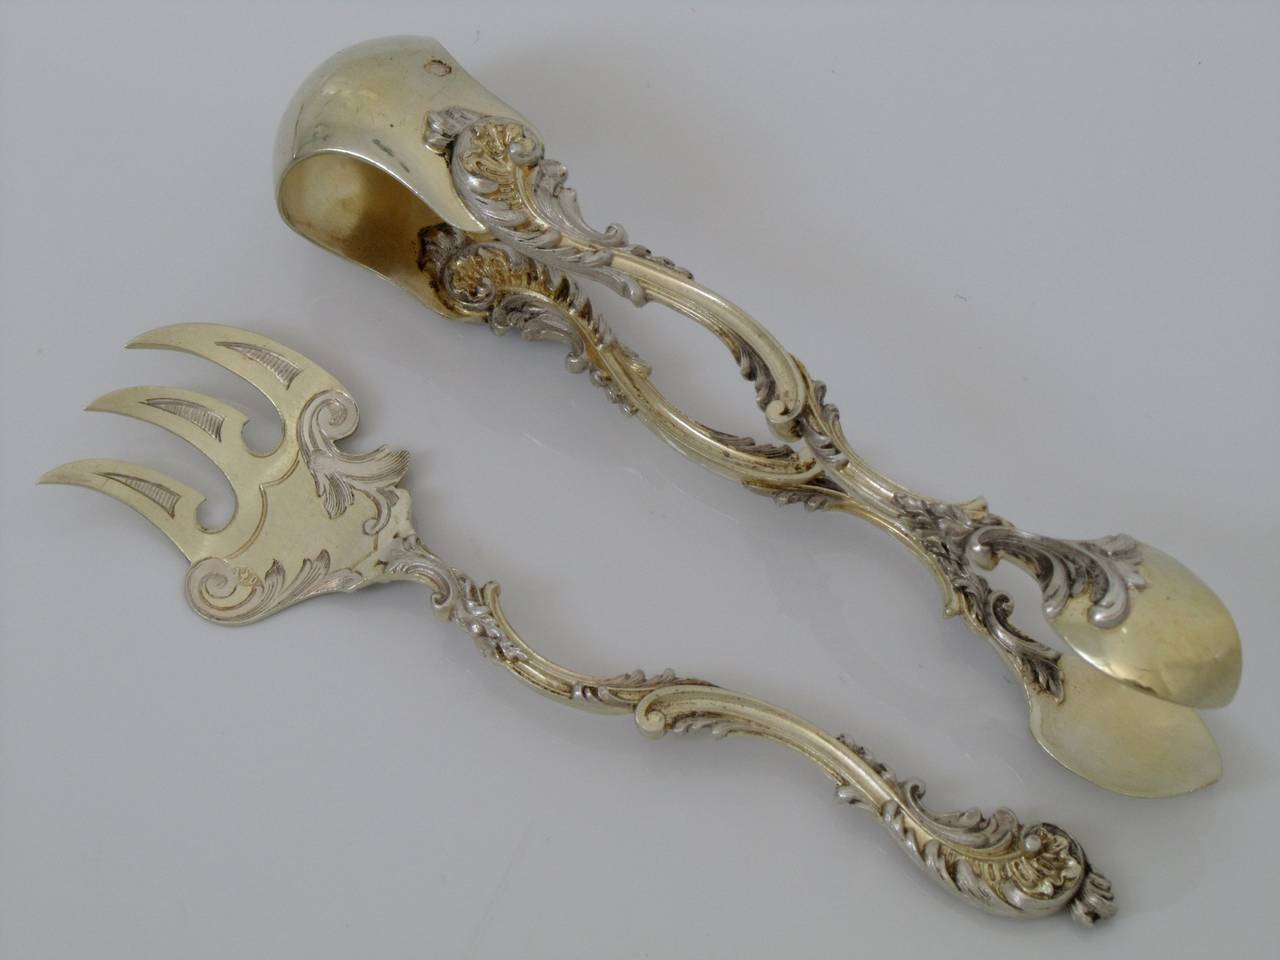 Debain French All Sterling Silver Vermeil Dessert Set 4 pc Asymmetrical Rococo In Good Condition For Sale In Triaize, Pays de Loire